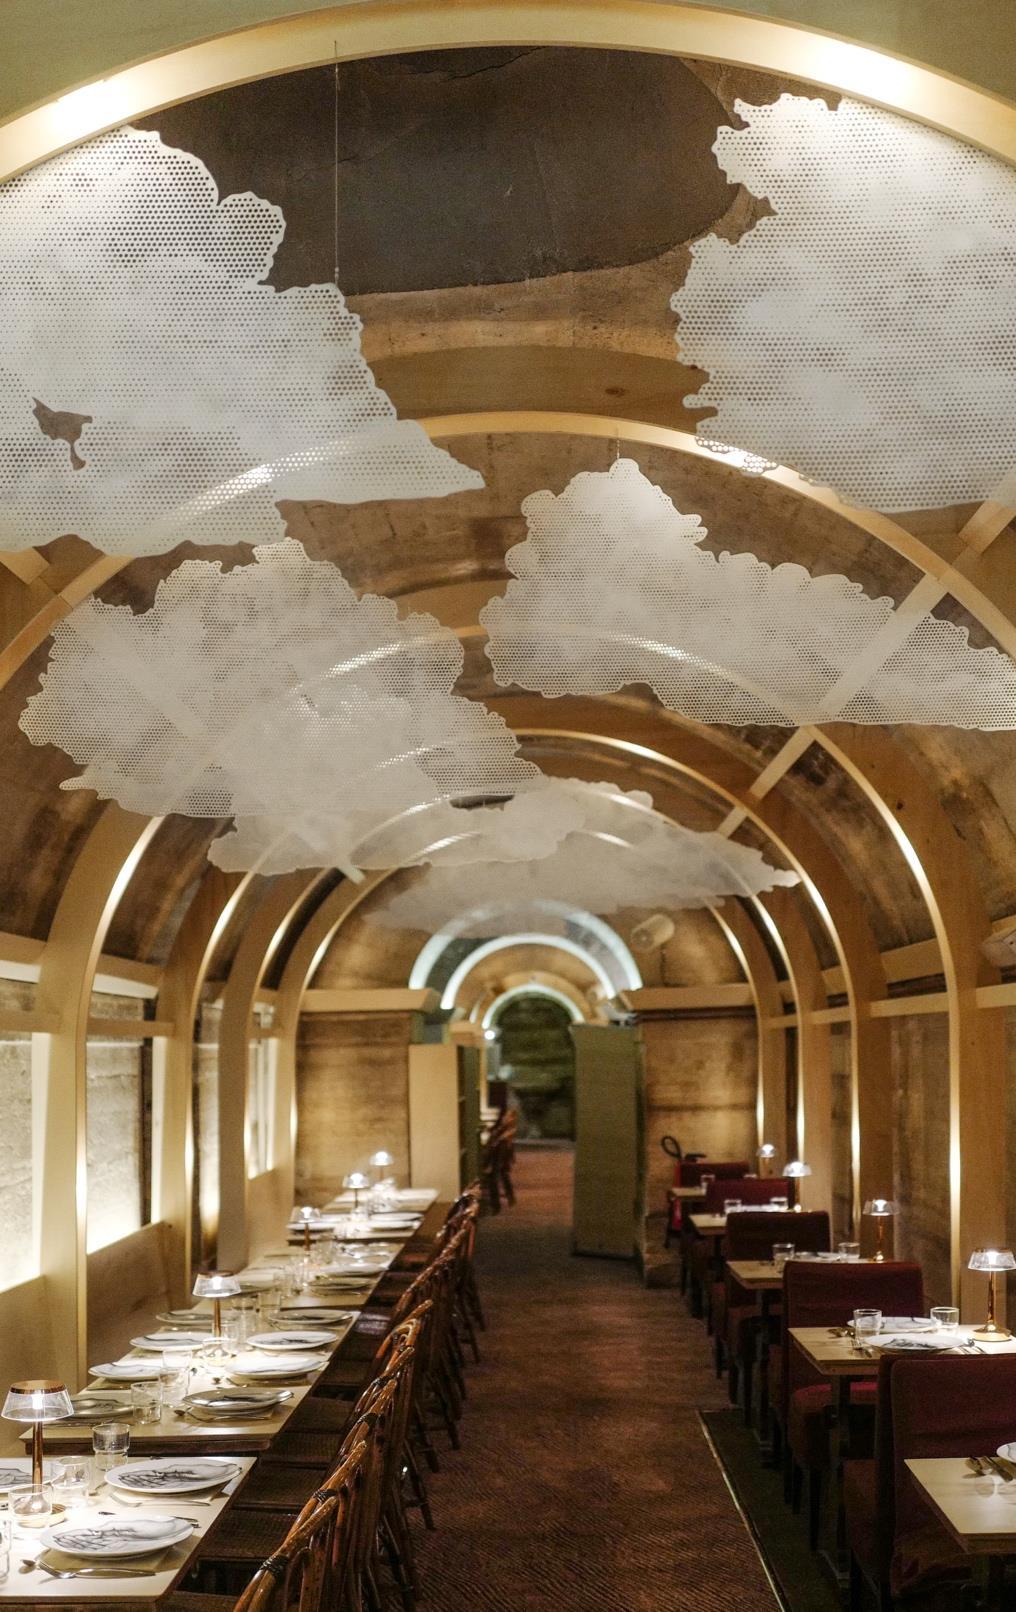 J.R. SOUP KITCHEN AND LUXURY HOTEL ON THE CHAMPS-ÉLYSÉES Reffetorio, Paris Among Ramy Fischler's latest projects is a commission for Refettorio Paris, a soup kitchen for the homeless and refugees,